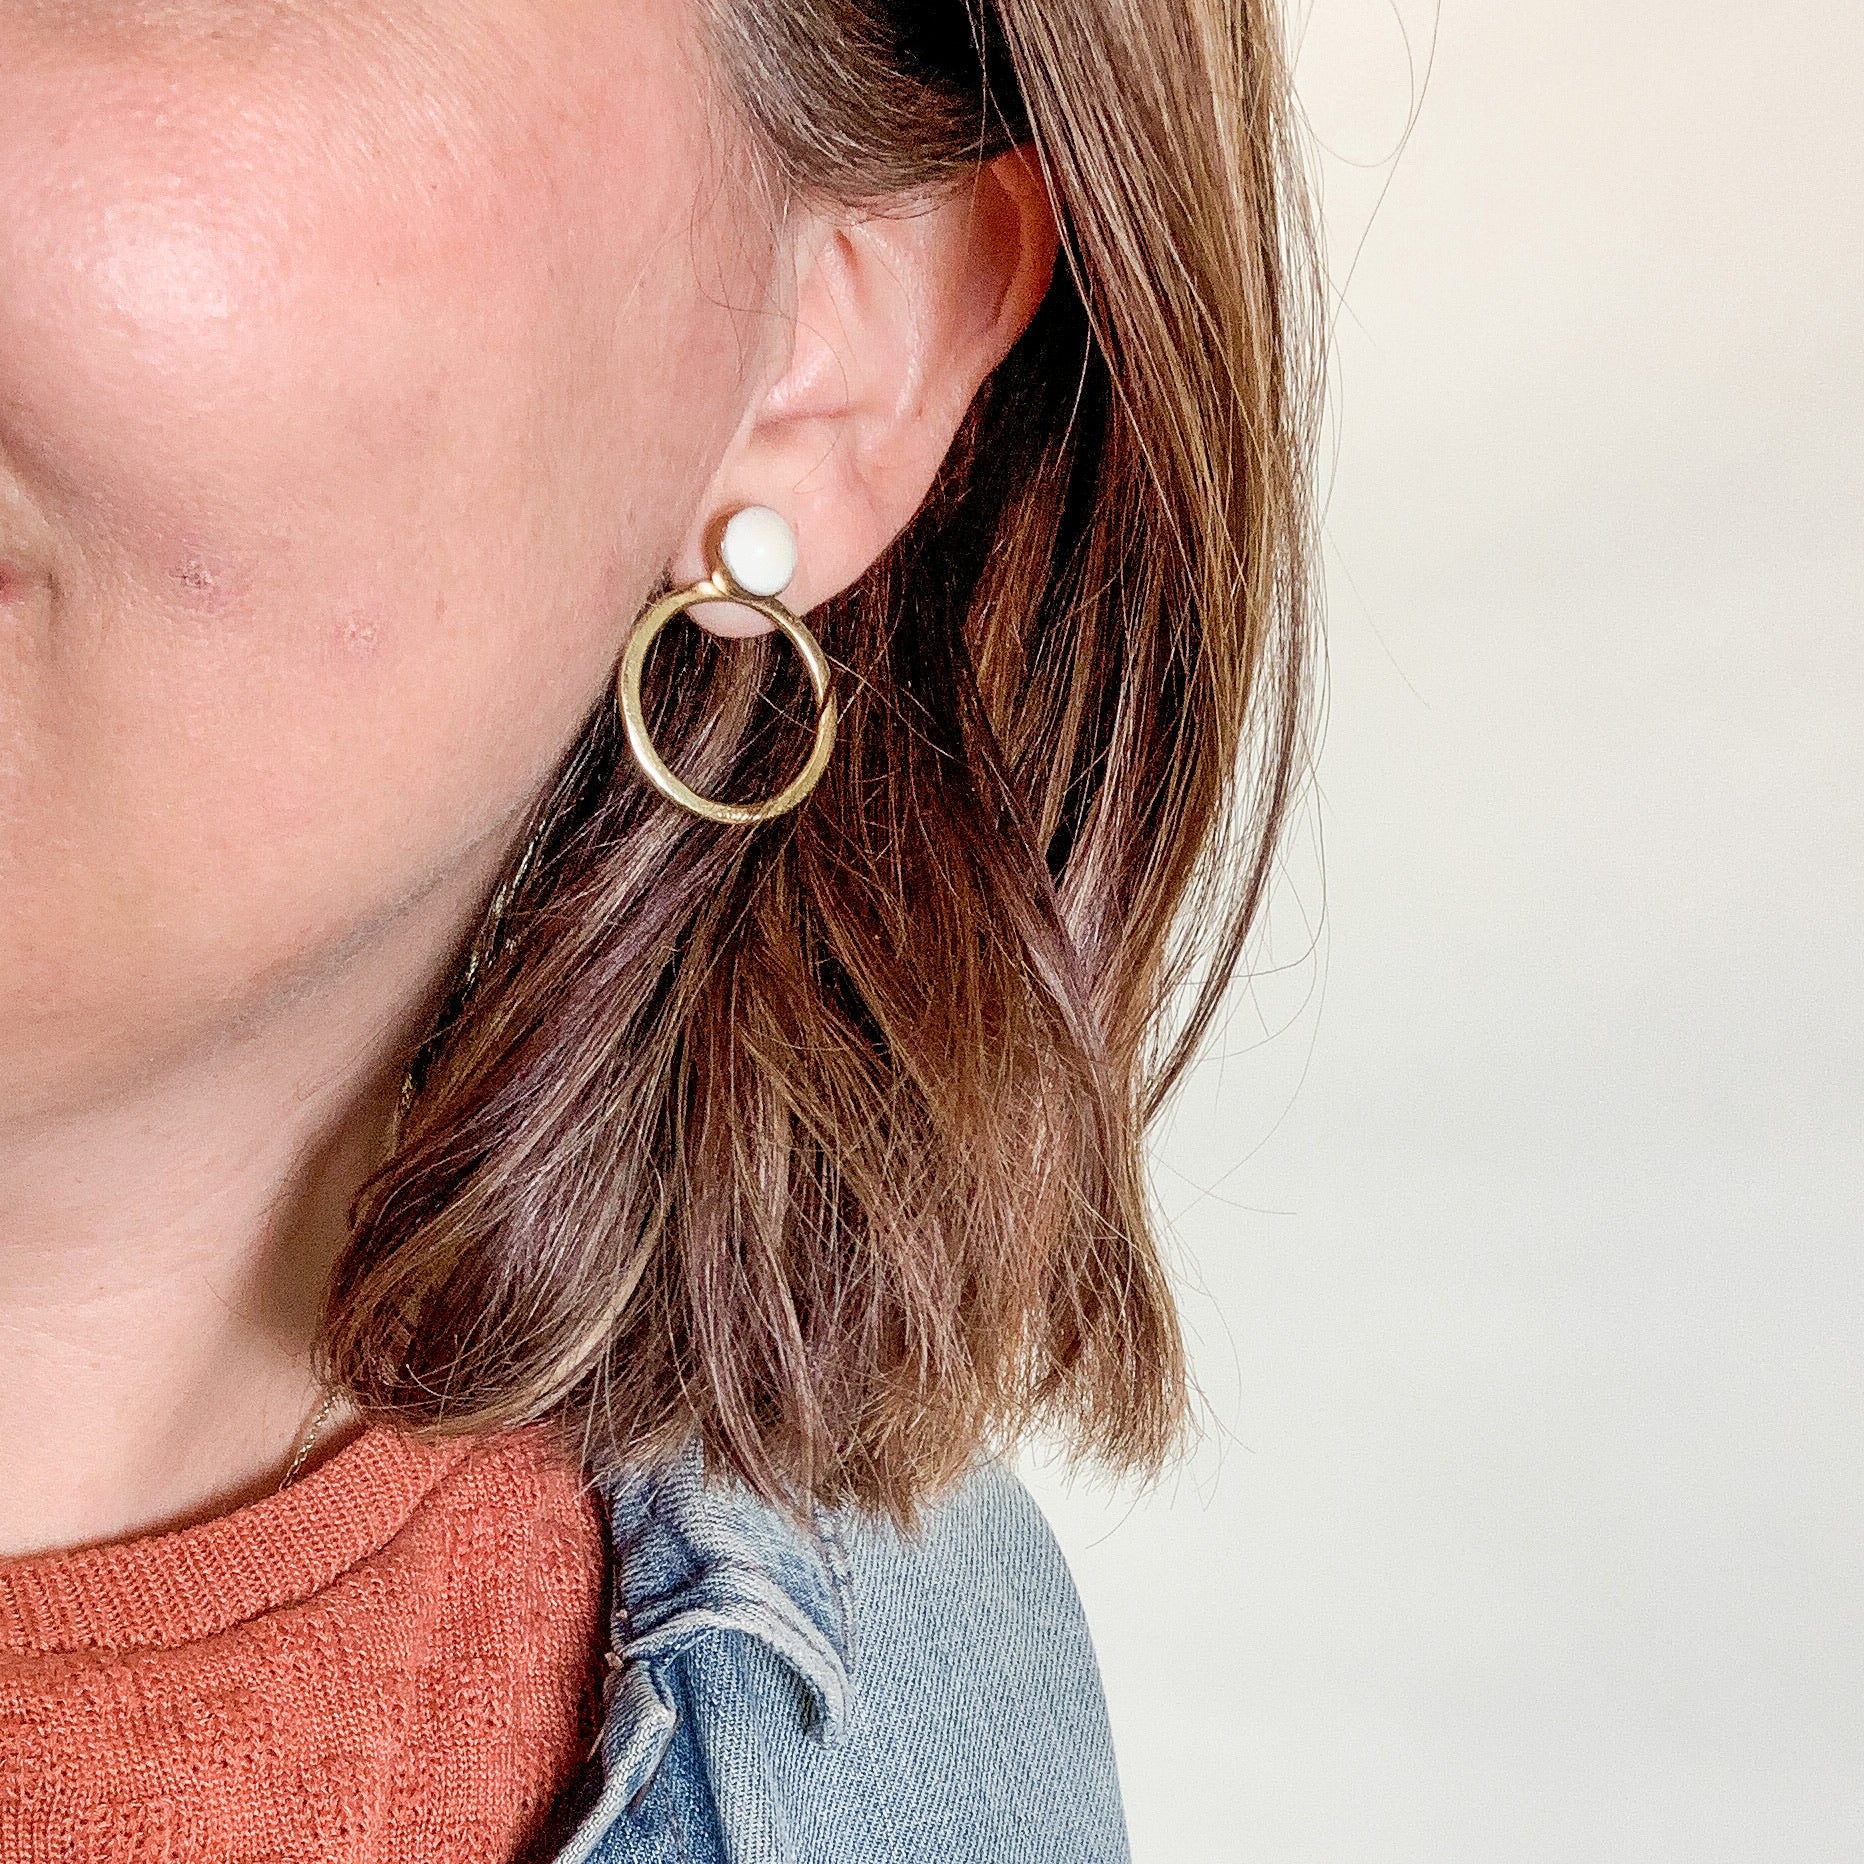 JustOne's brass hoop earrings with detachable white circle stud at the top, ethically made from recycled materials in Kenya